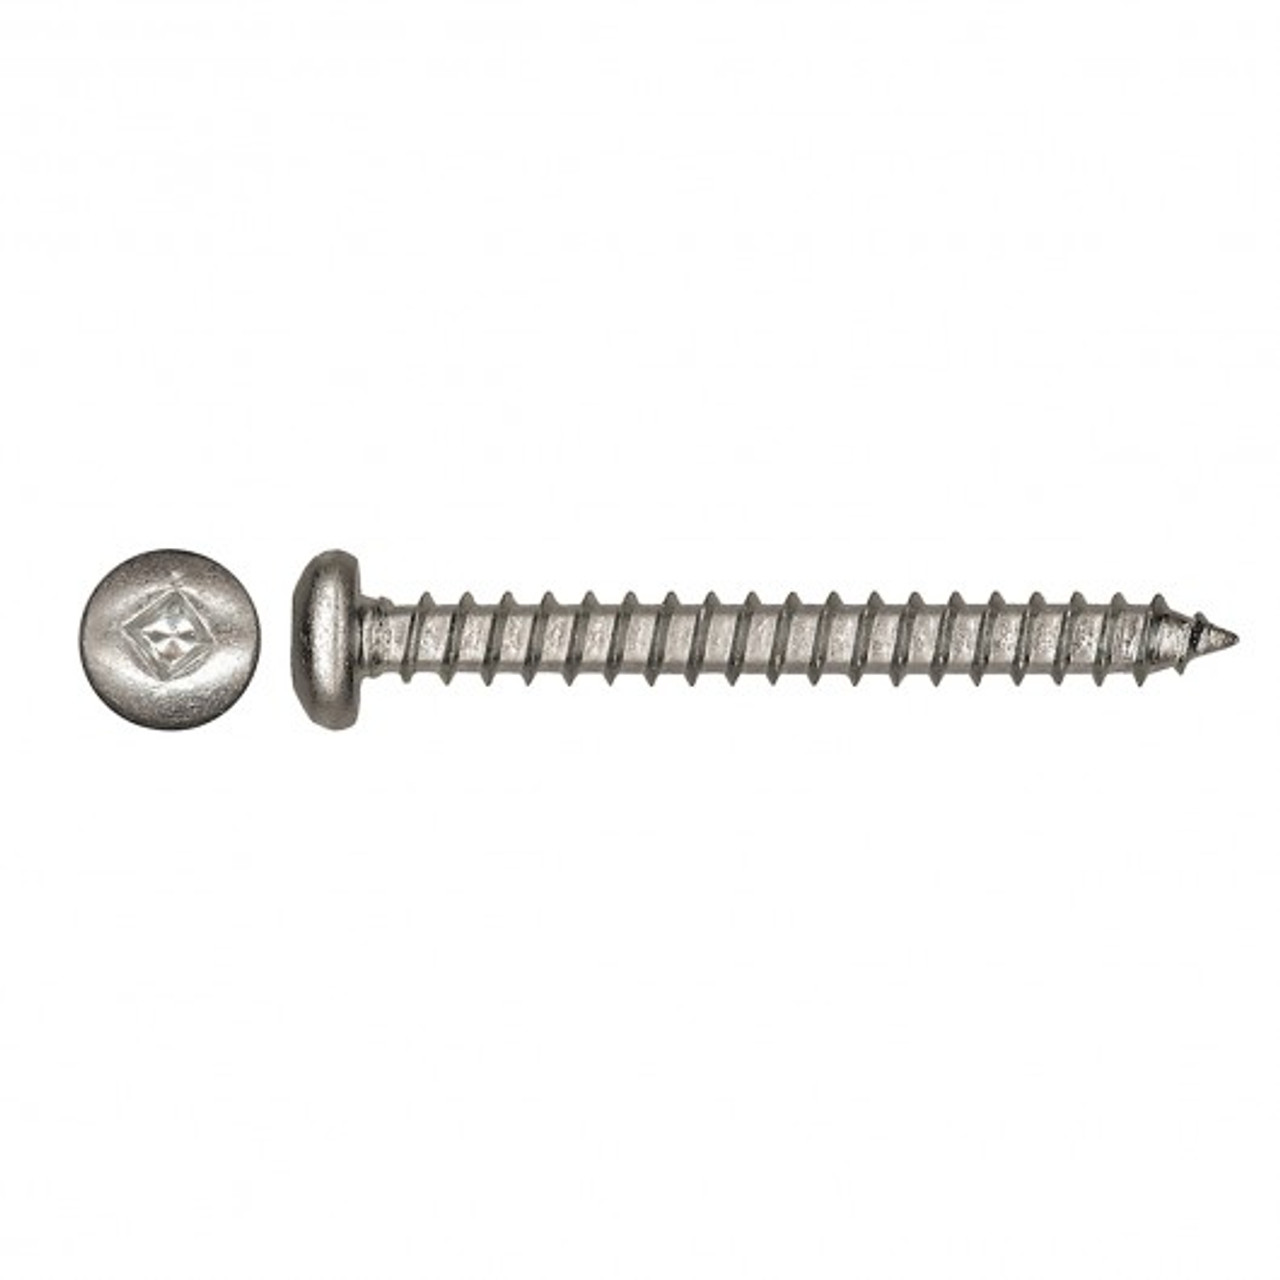 #10 x 1" Pan Head Stainless Steel Tapping Screw 100 Pc.   5163-193